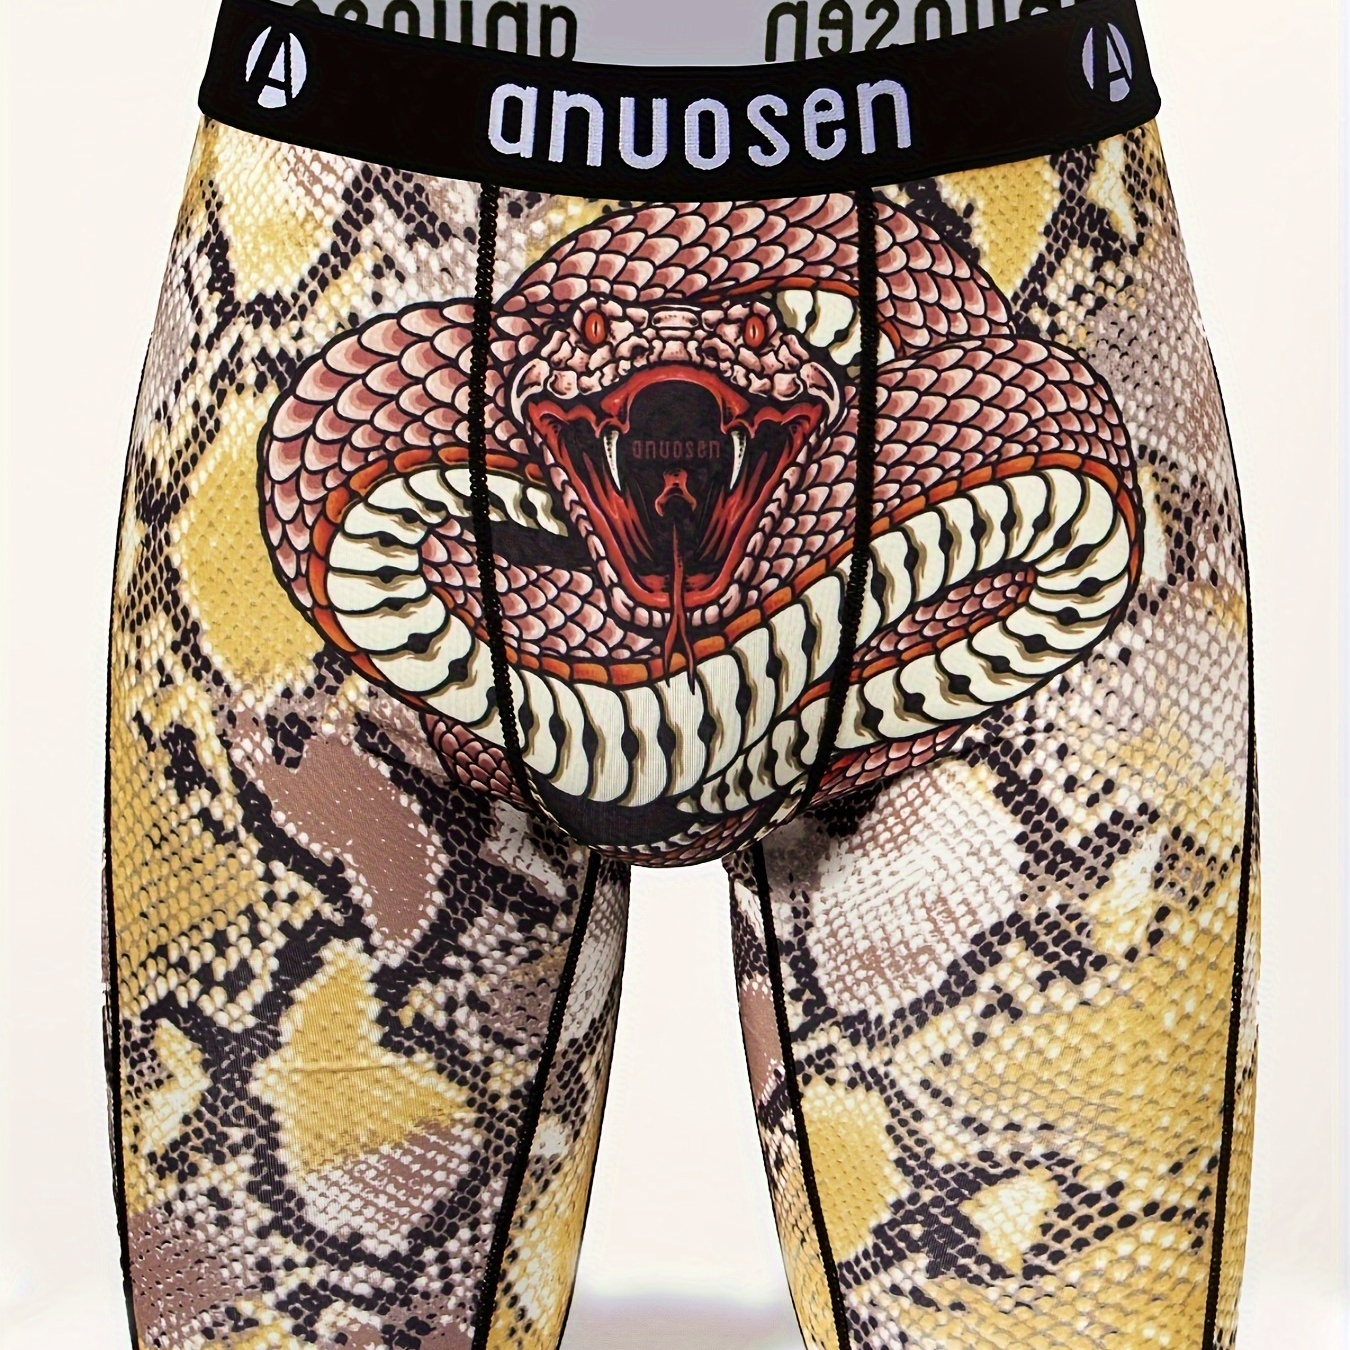 

Men's Snake Print Fashion Novelty Graphic Long Boxer Briefs Shorts, Anti-wear Legs Quick-drying Breathable Comfy Boxer Trunks, Sports Briefs, Men's Underwear